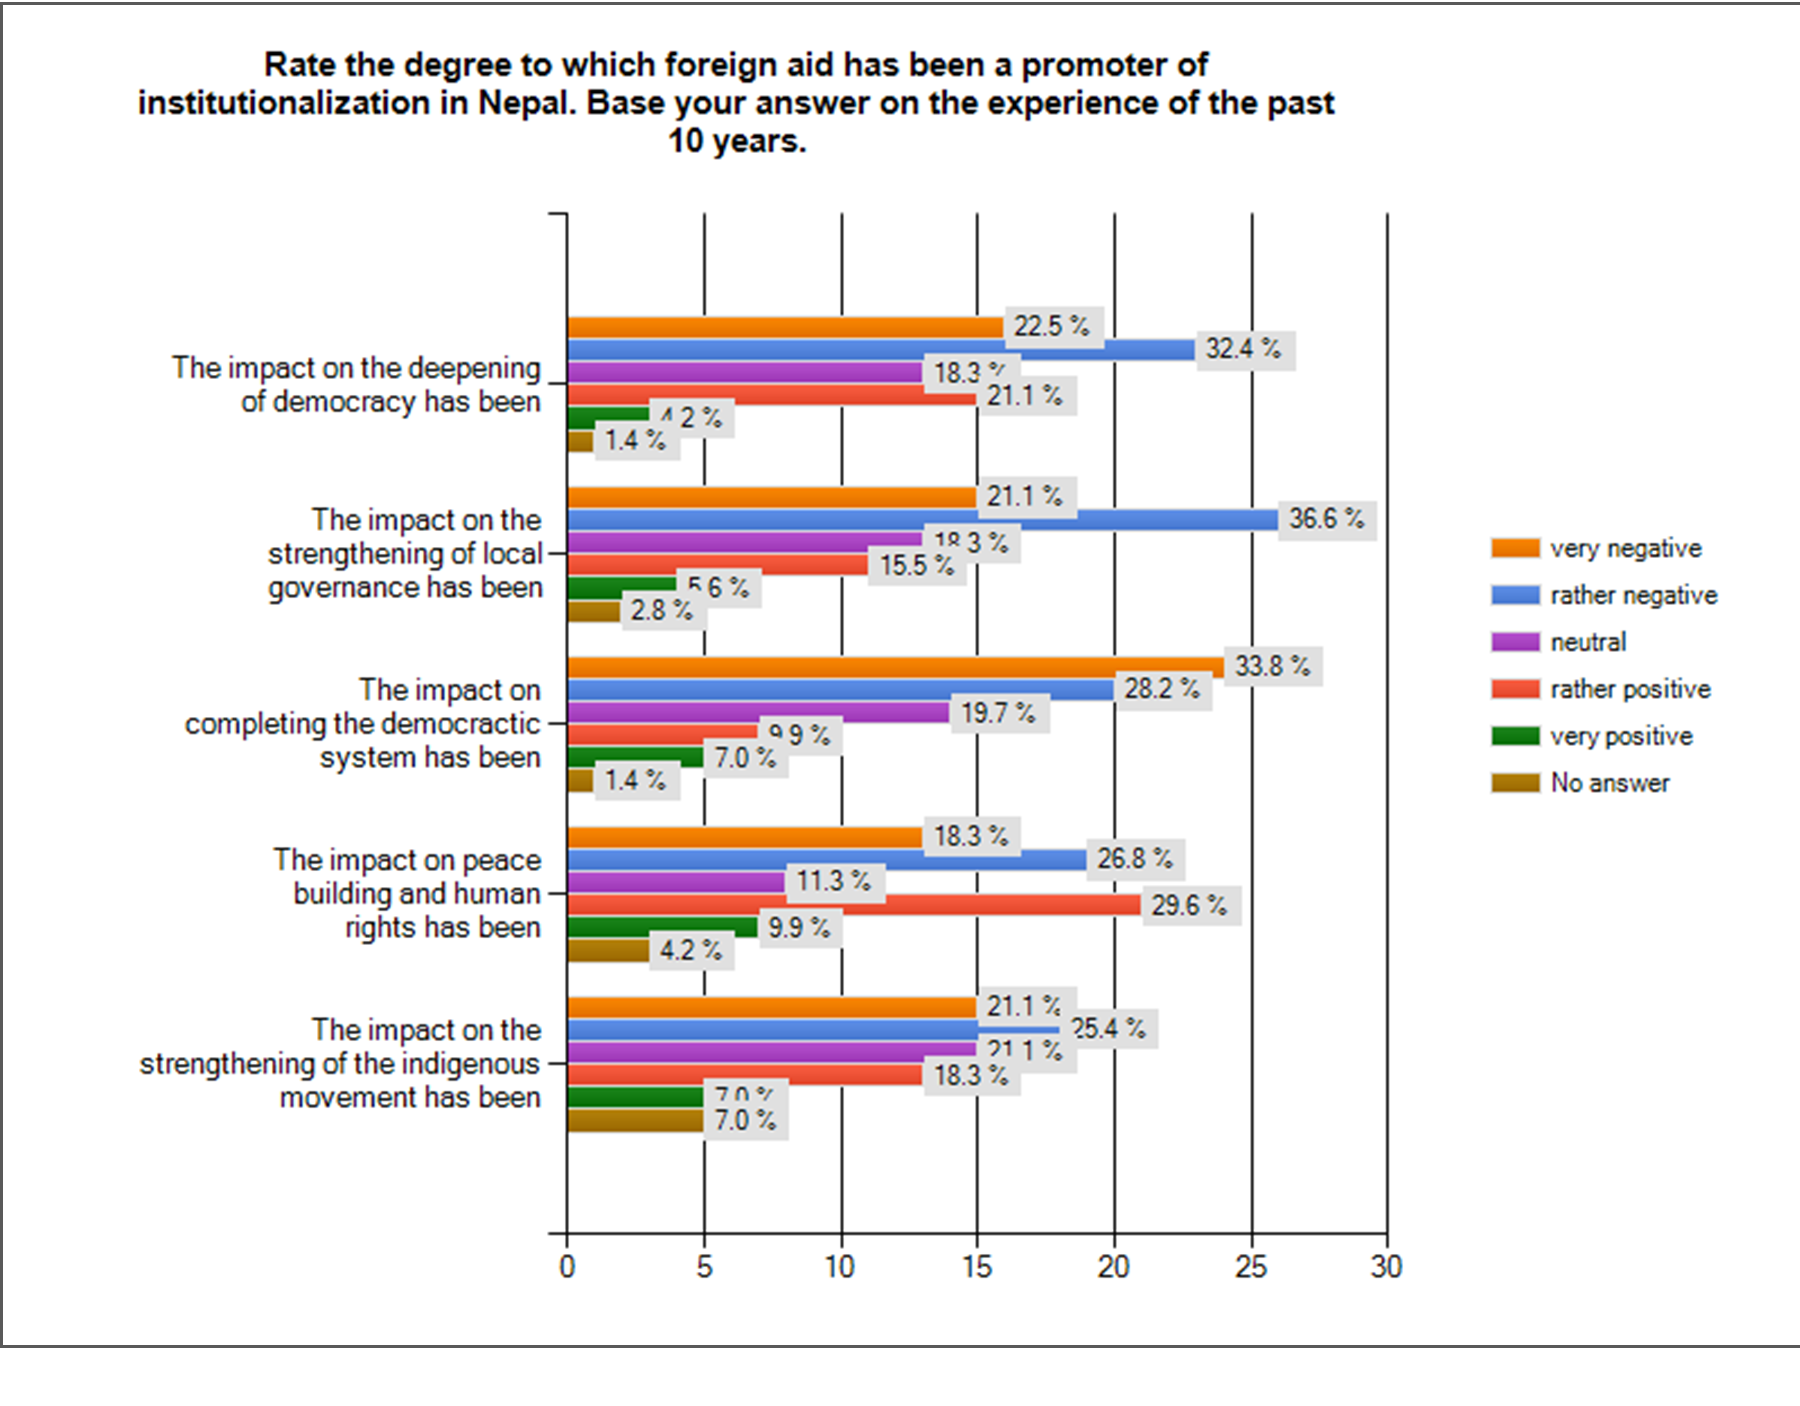 Figure 2: Foreign aid as a promoter of institutionalization (percentages of response choices).